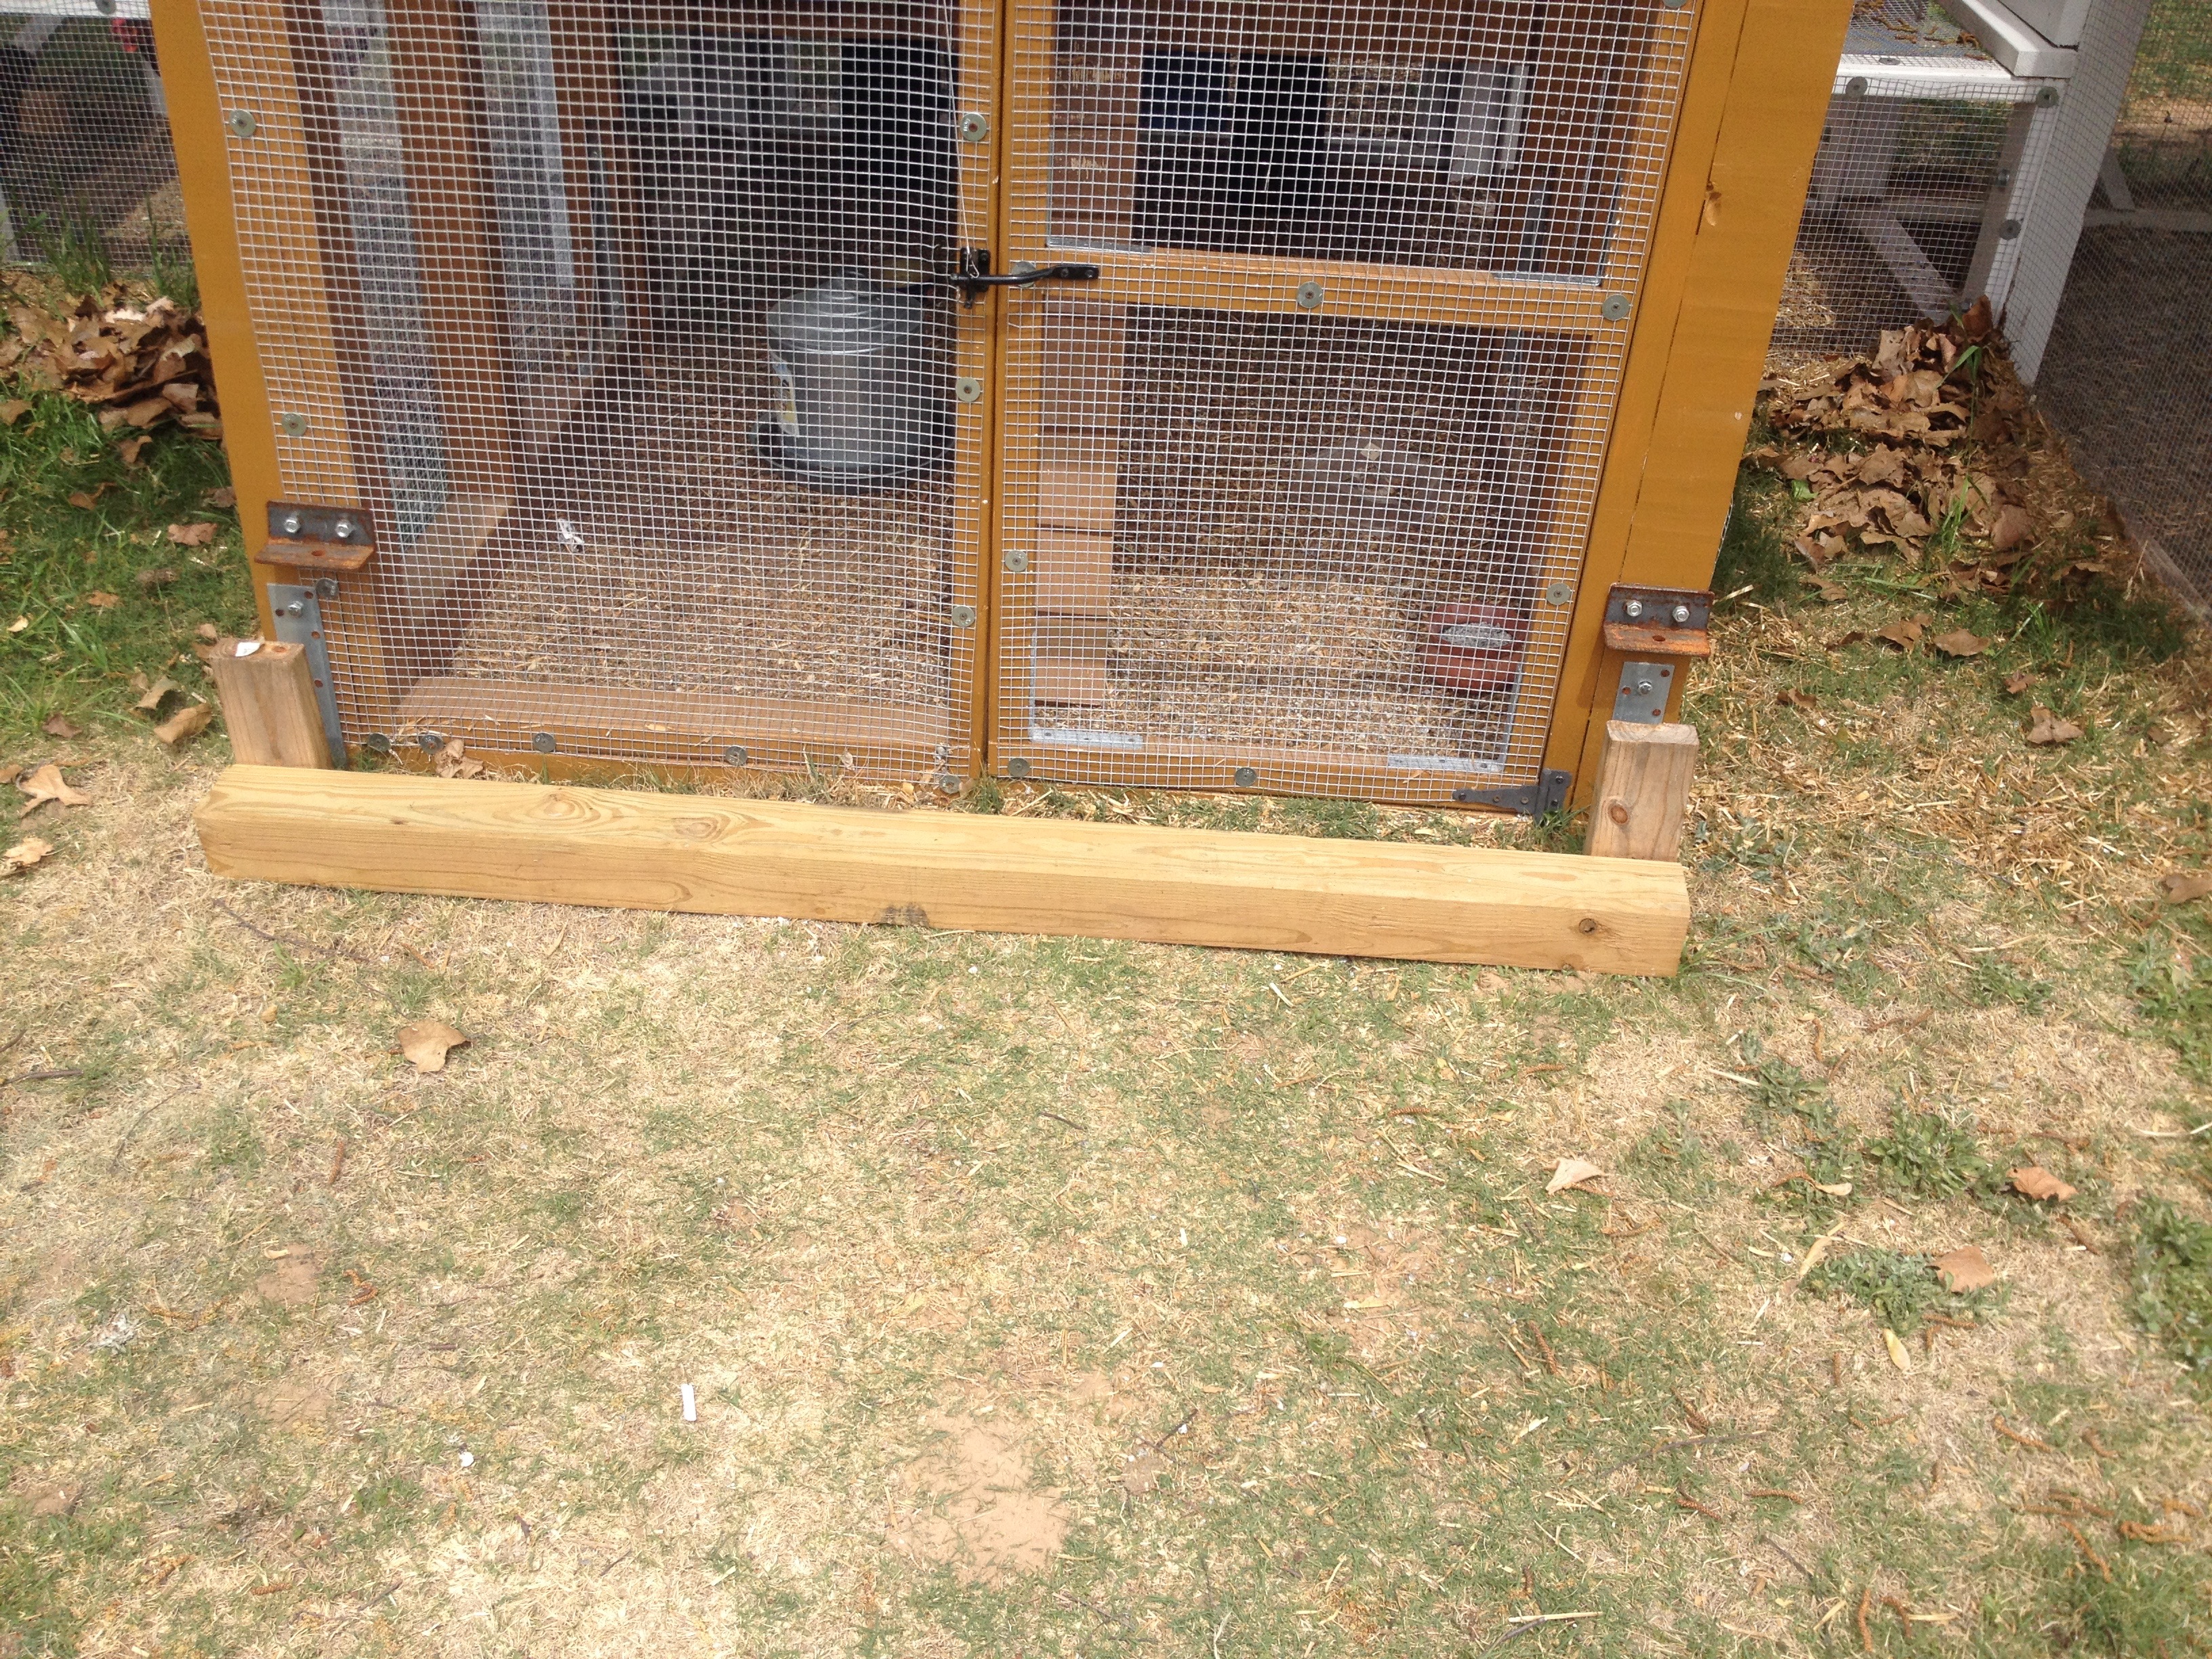 This wooden piece fits between the coop and the metal towing bar.  Using it, the wire screen on the coop doesn't get torn up when moved.